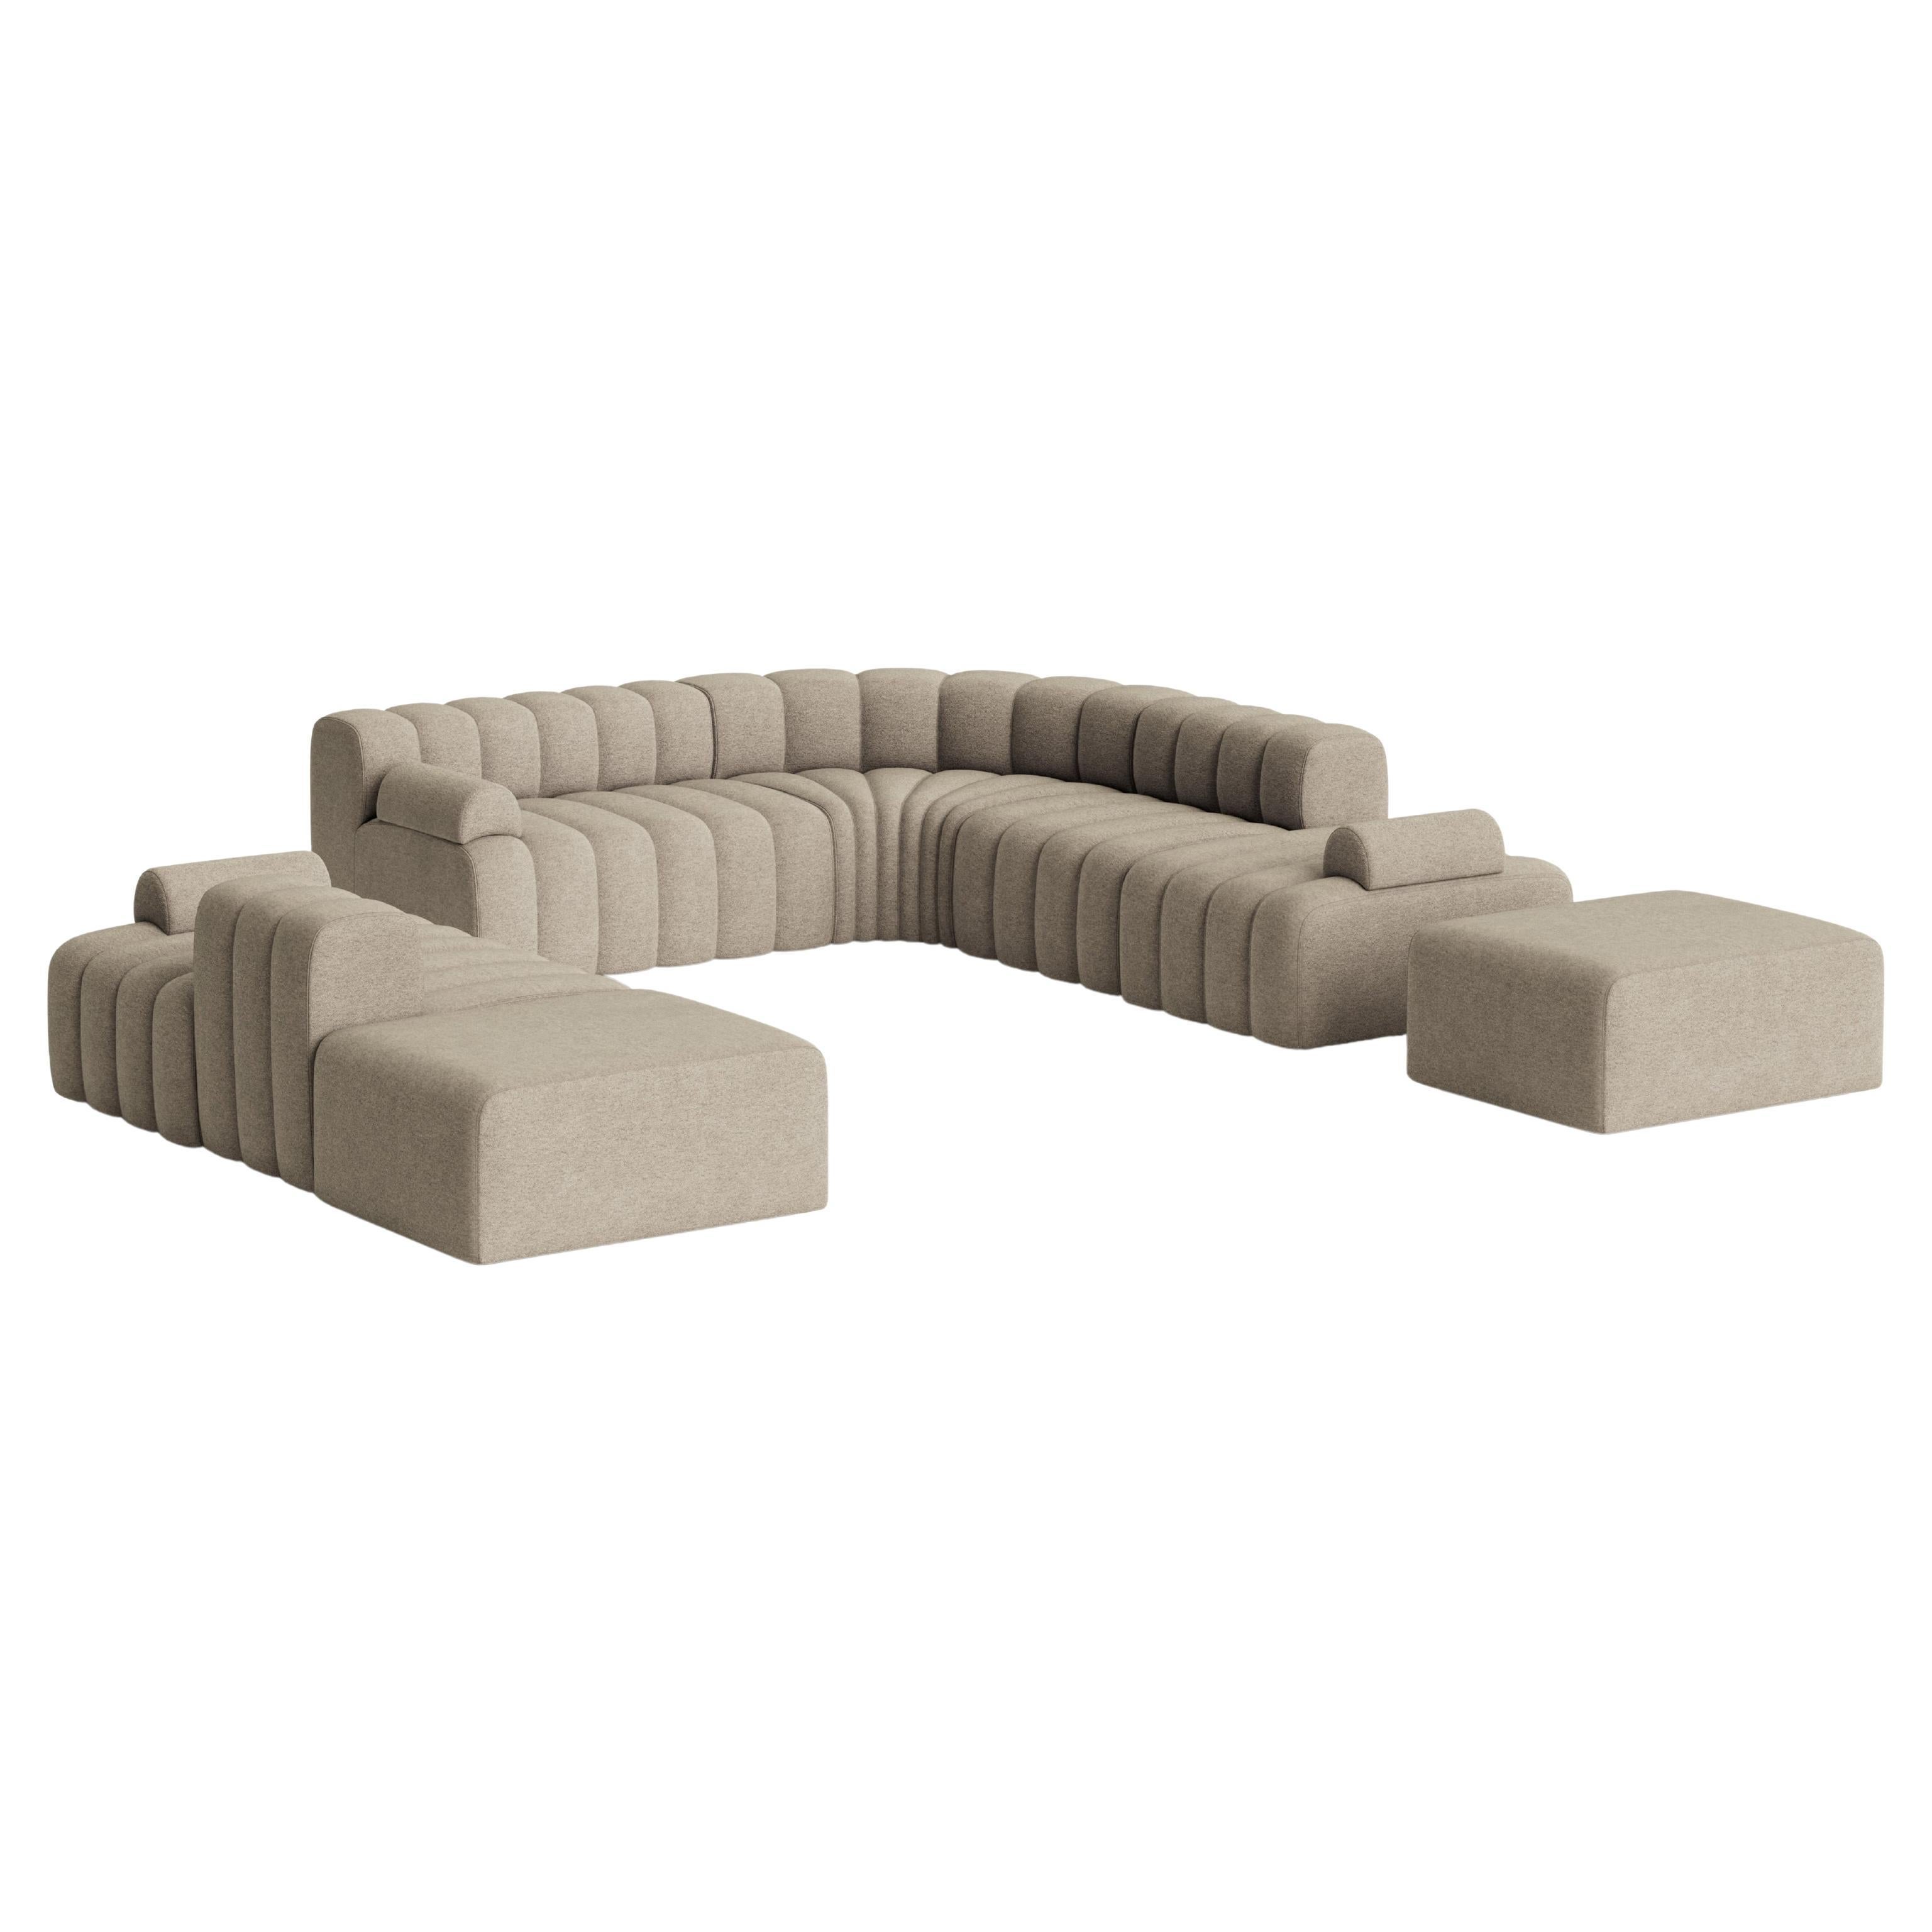 Customizable Norr11 Studio 5 Sectional by Kristian Sofus Hansen & Tommy Hyldahl For Sale